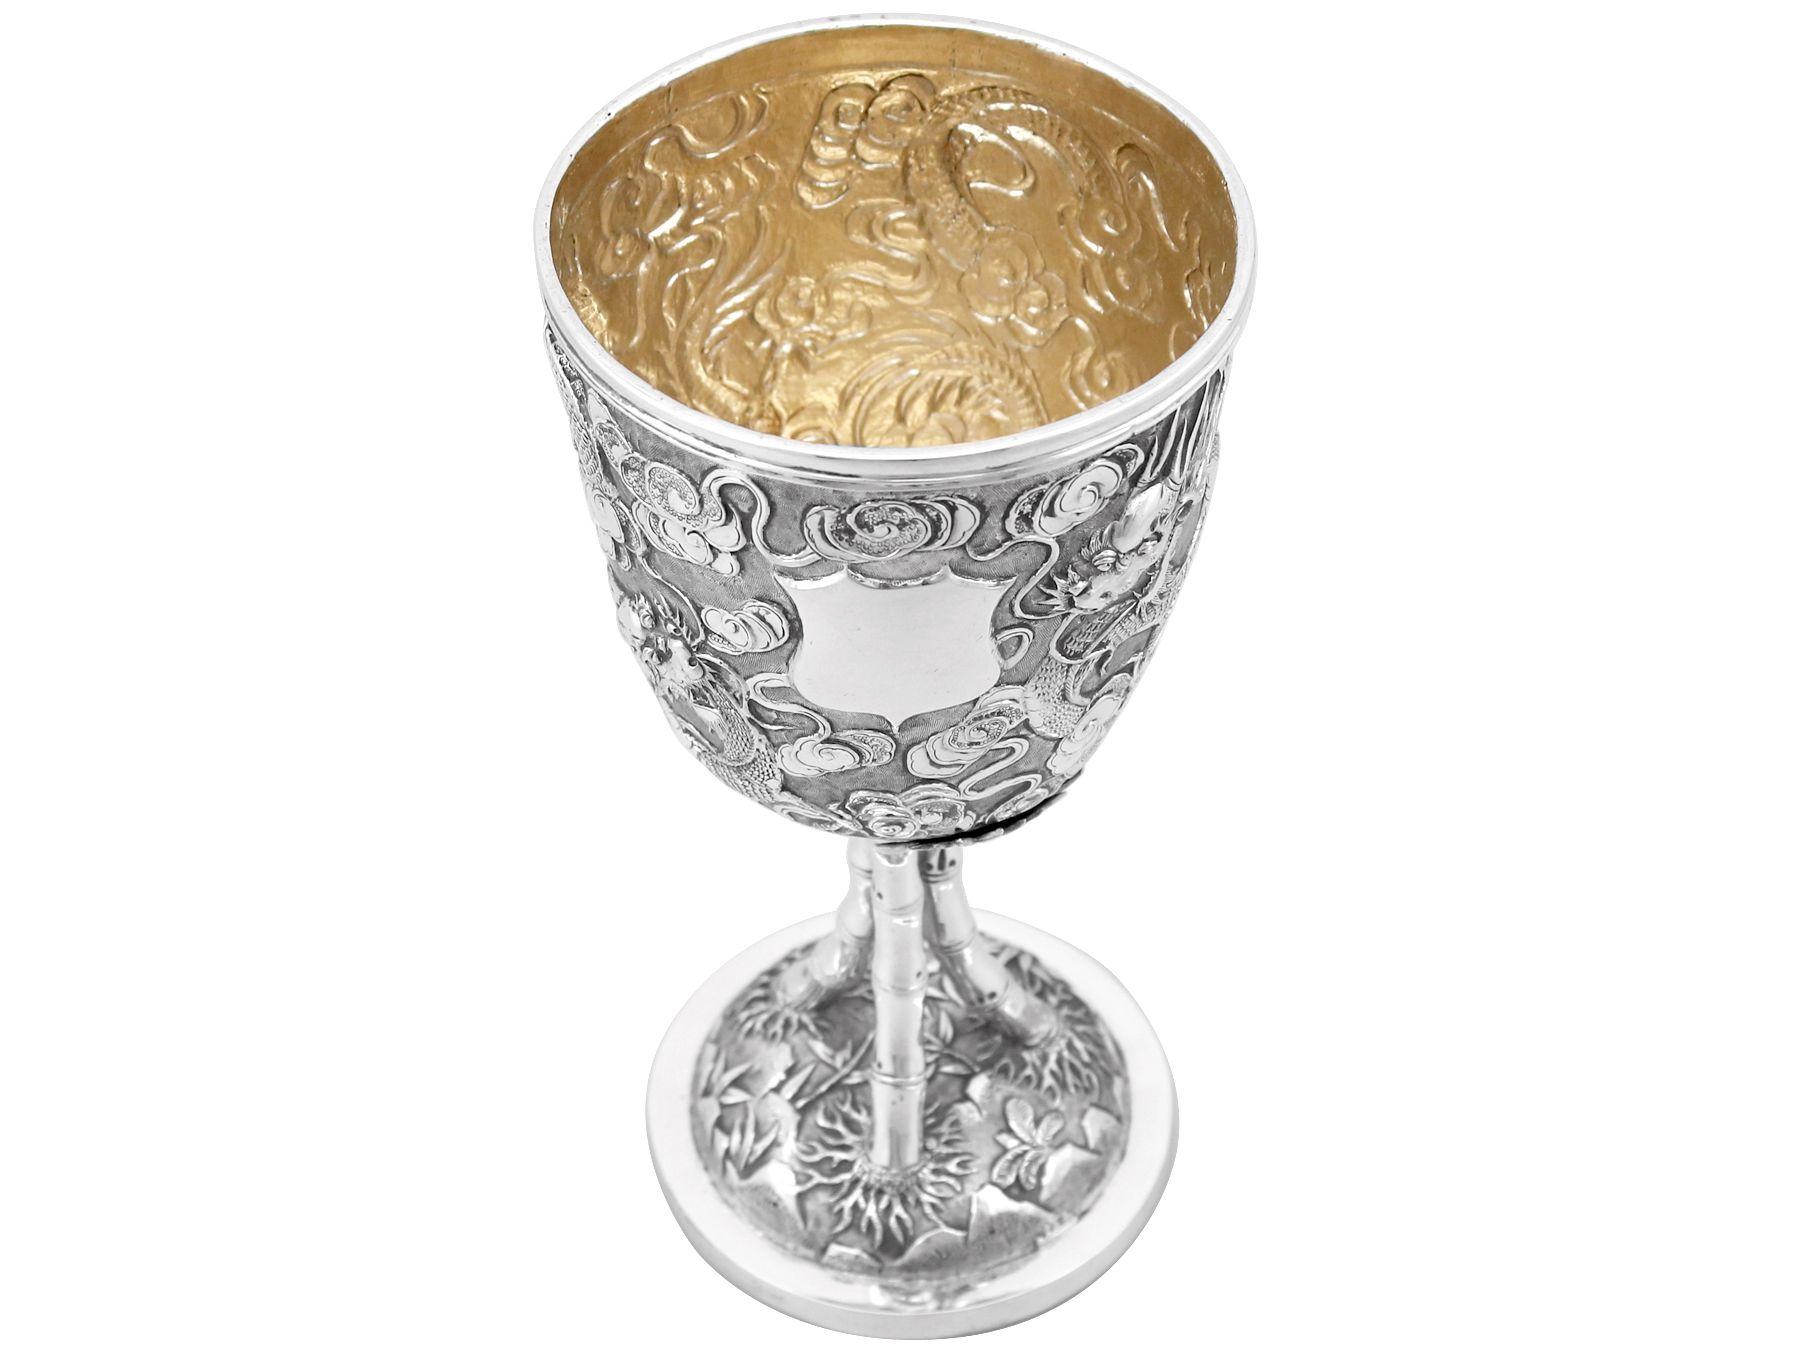 An exceptional, fine and impressive antique Chinese Export Silver goblet; an addition to our wine and drinks related silverware collection

This exceptional antique Chinese Export Silver (CES) goblet has a circular bell shaped form, to a shaped